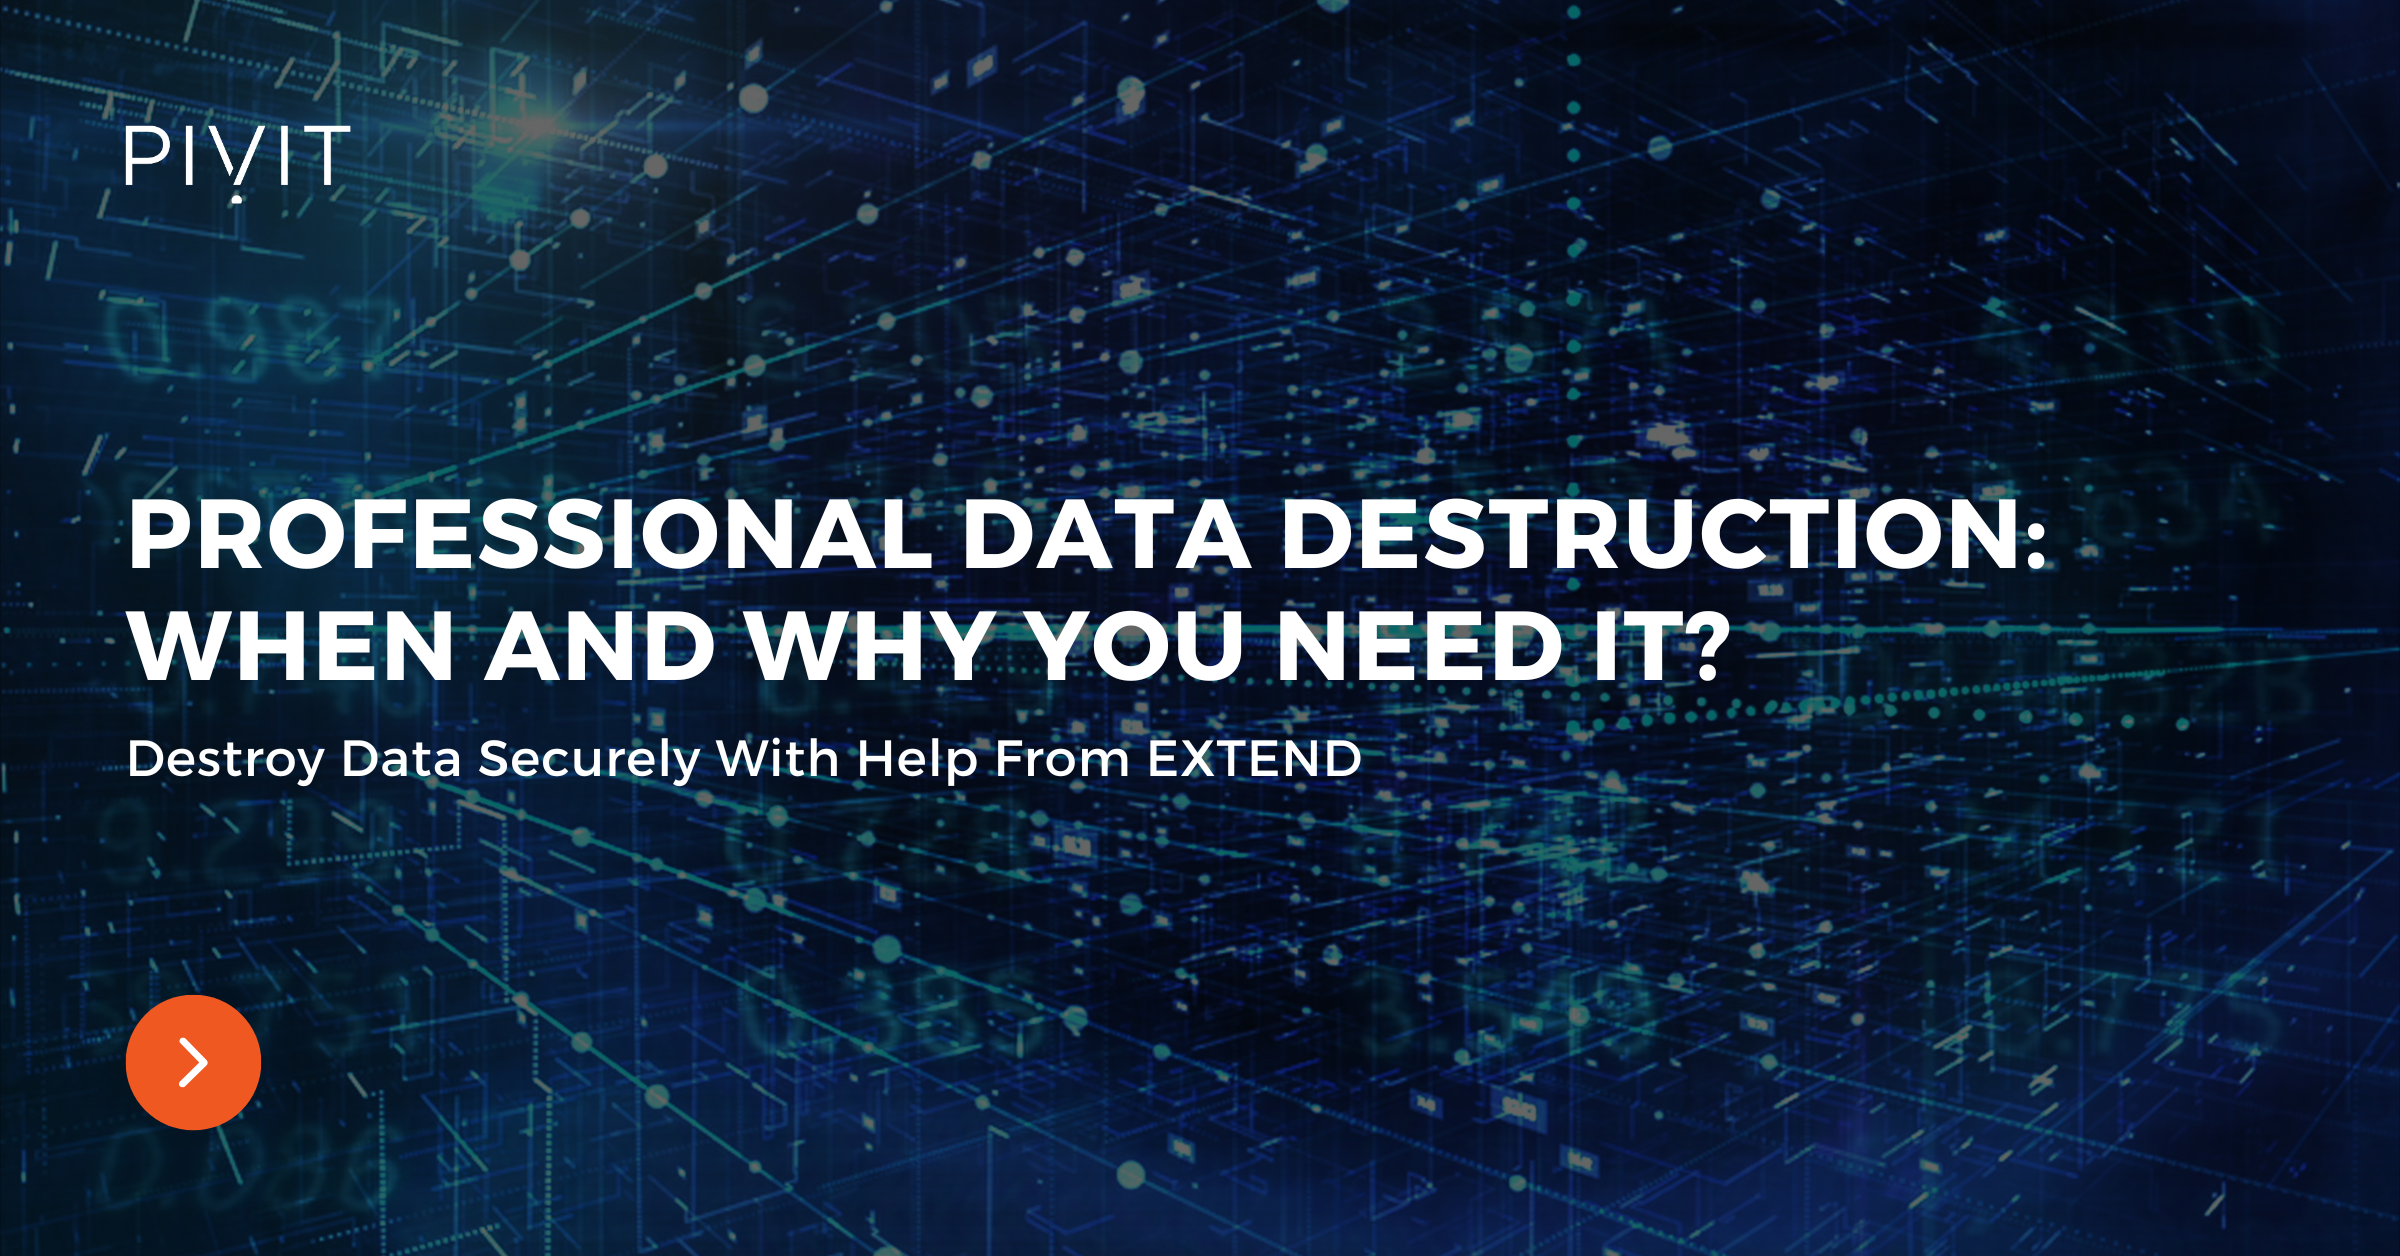 Professional Data Destruction: When and Why You Need It